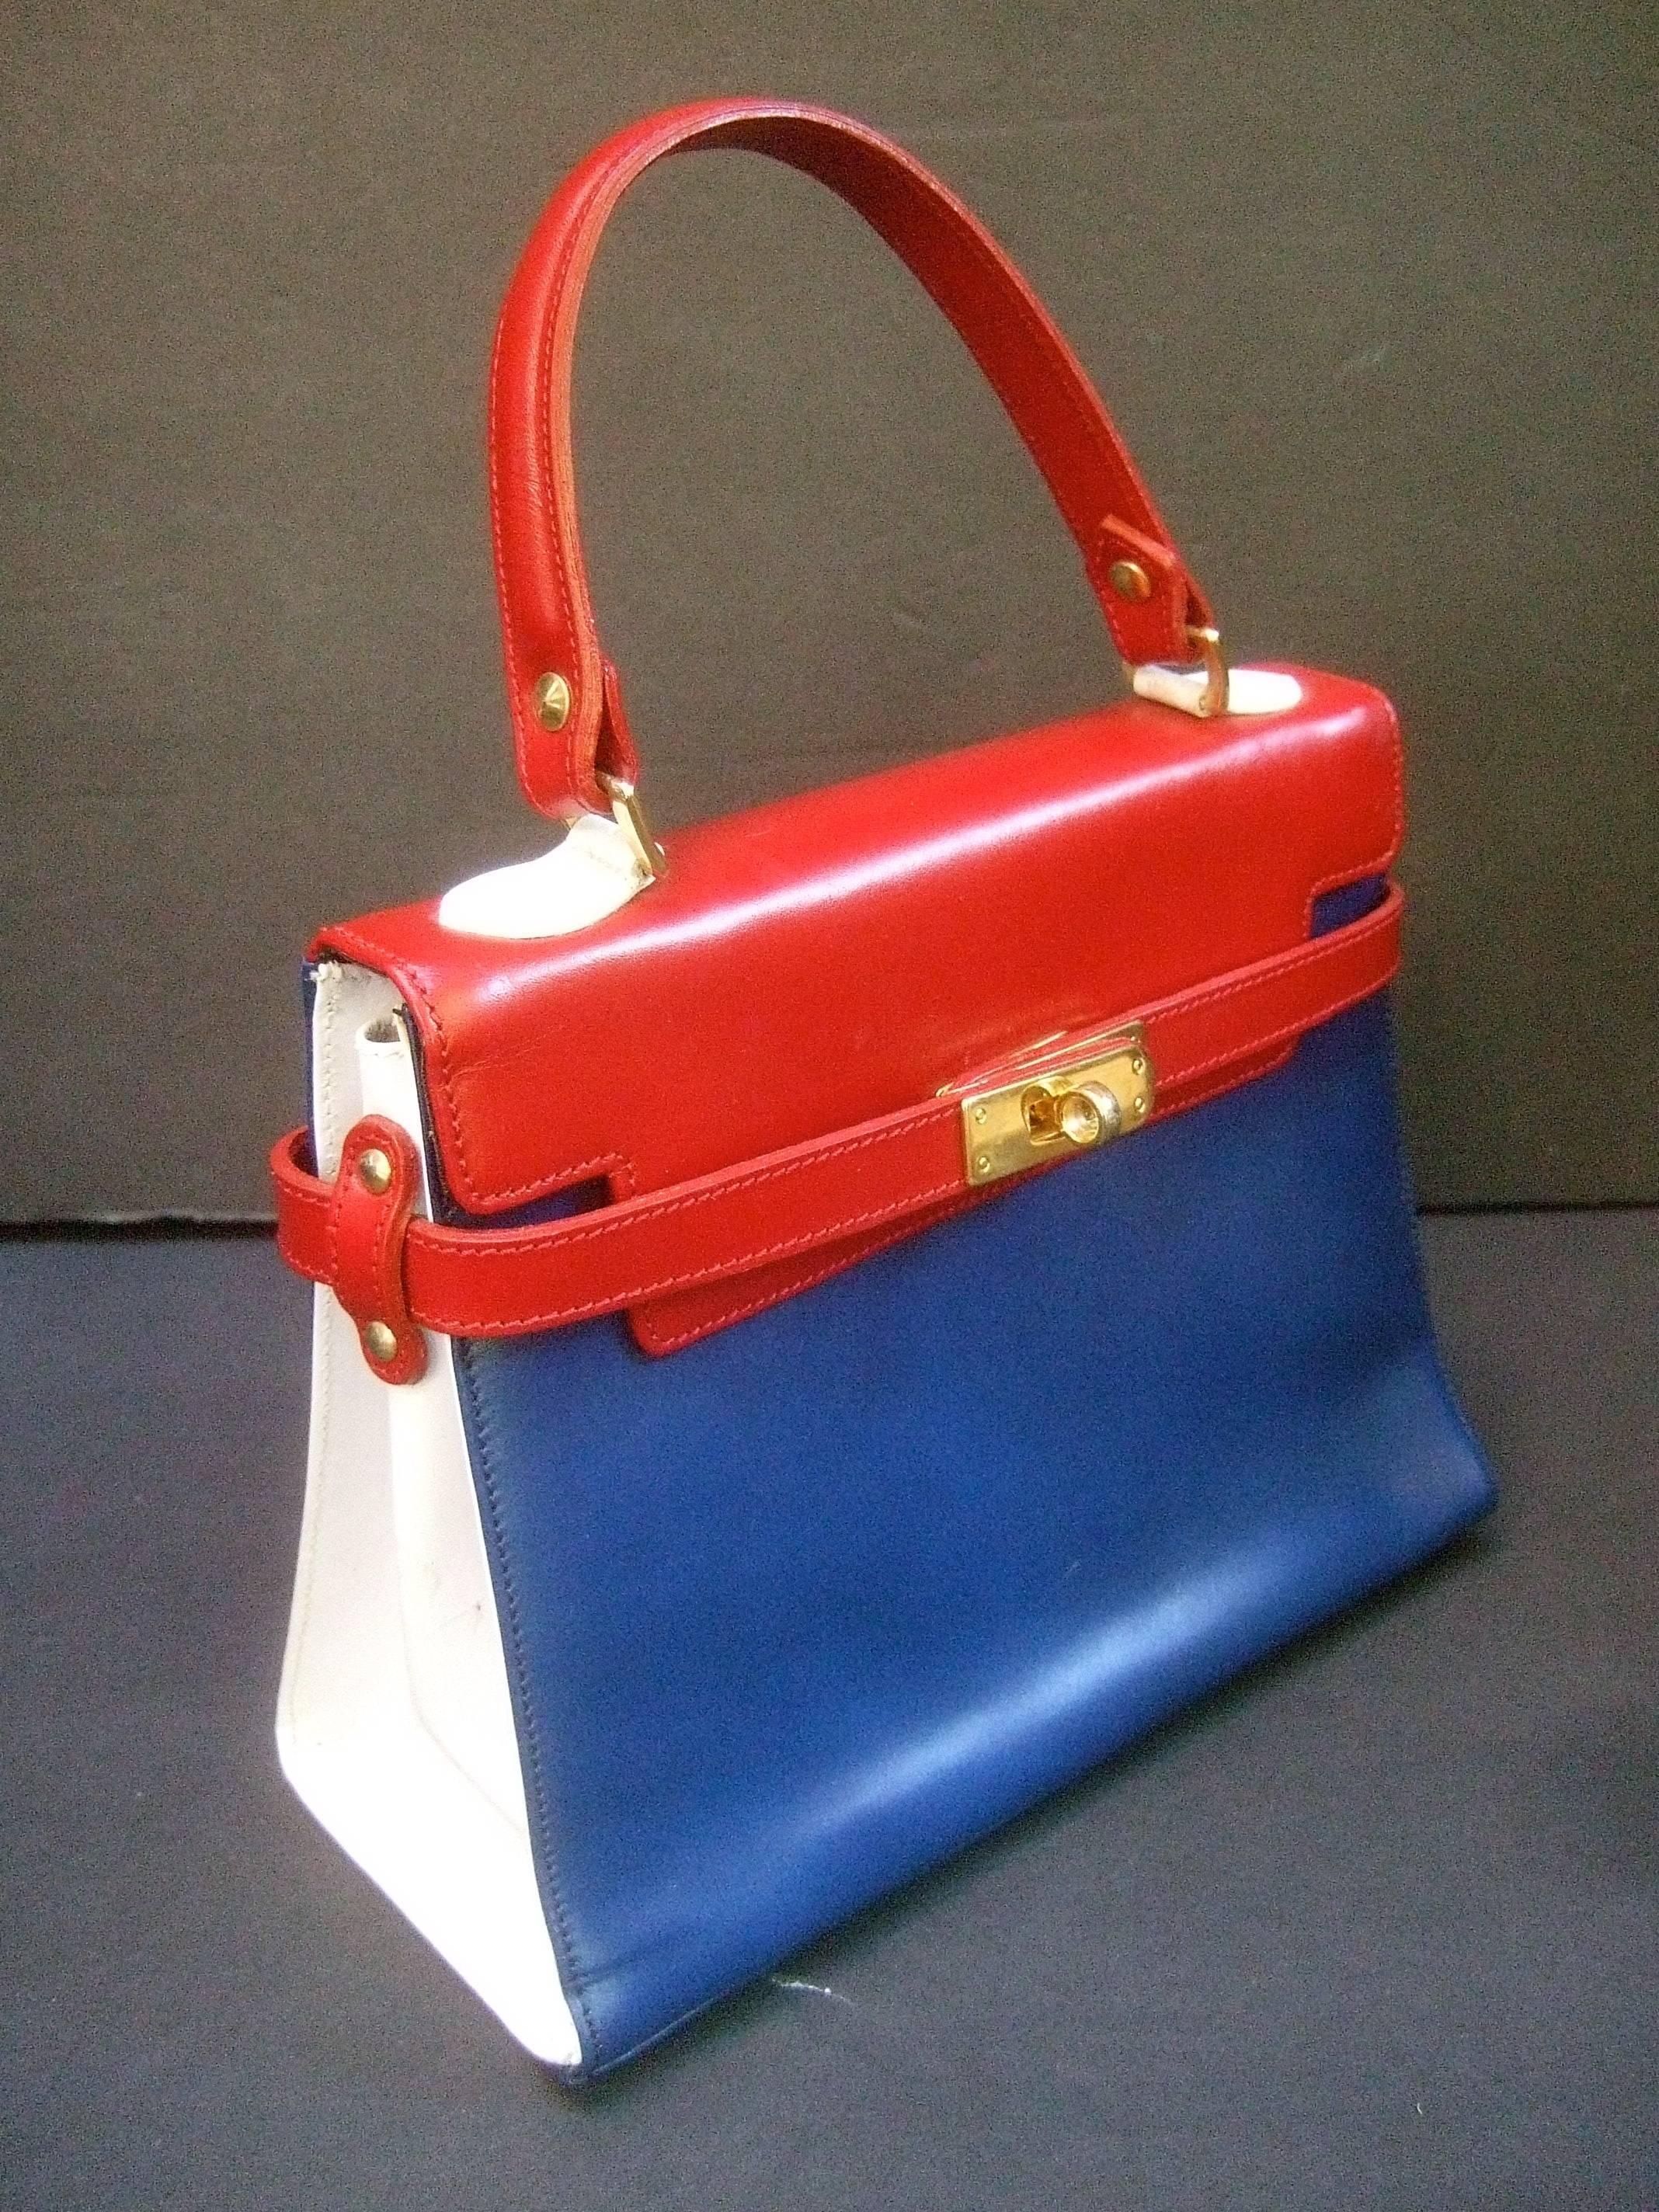 Chic mod Italian leather handbag c 1970
The stylish retro handbag has a classic
design with a twist 

The red, white and blue leather covering 
makes for a stylish unique accessory 
Adorned with sleek gilt metal hardware

The interior is lined in